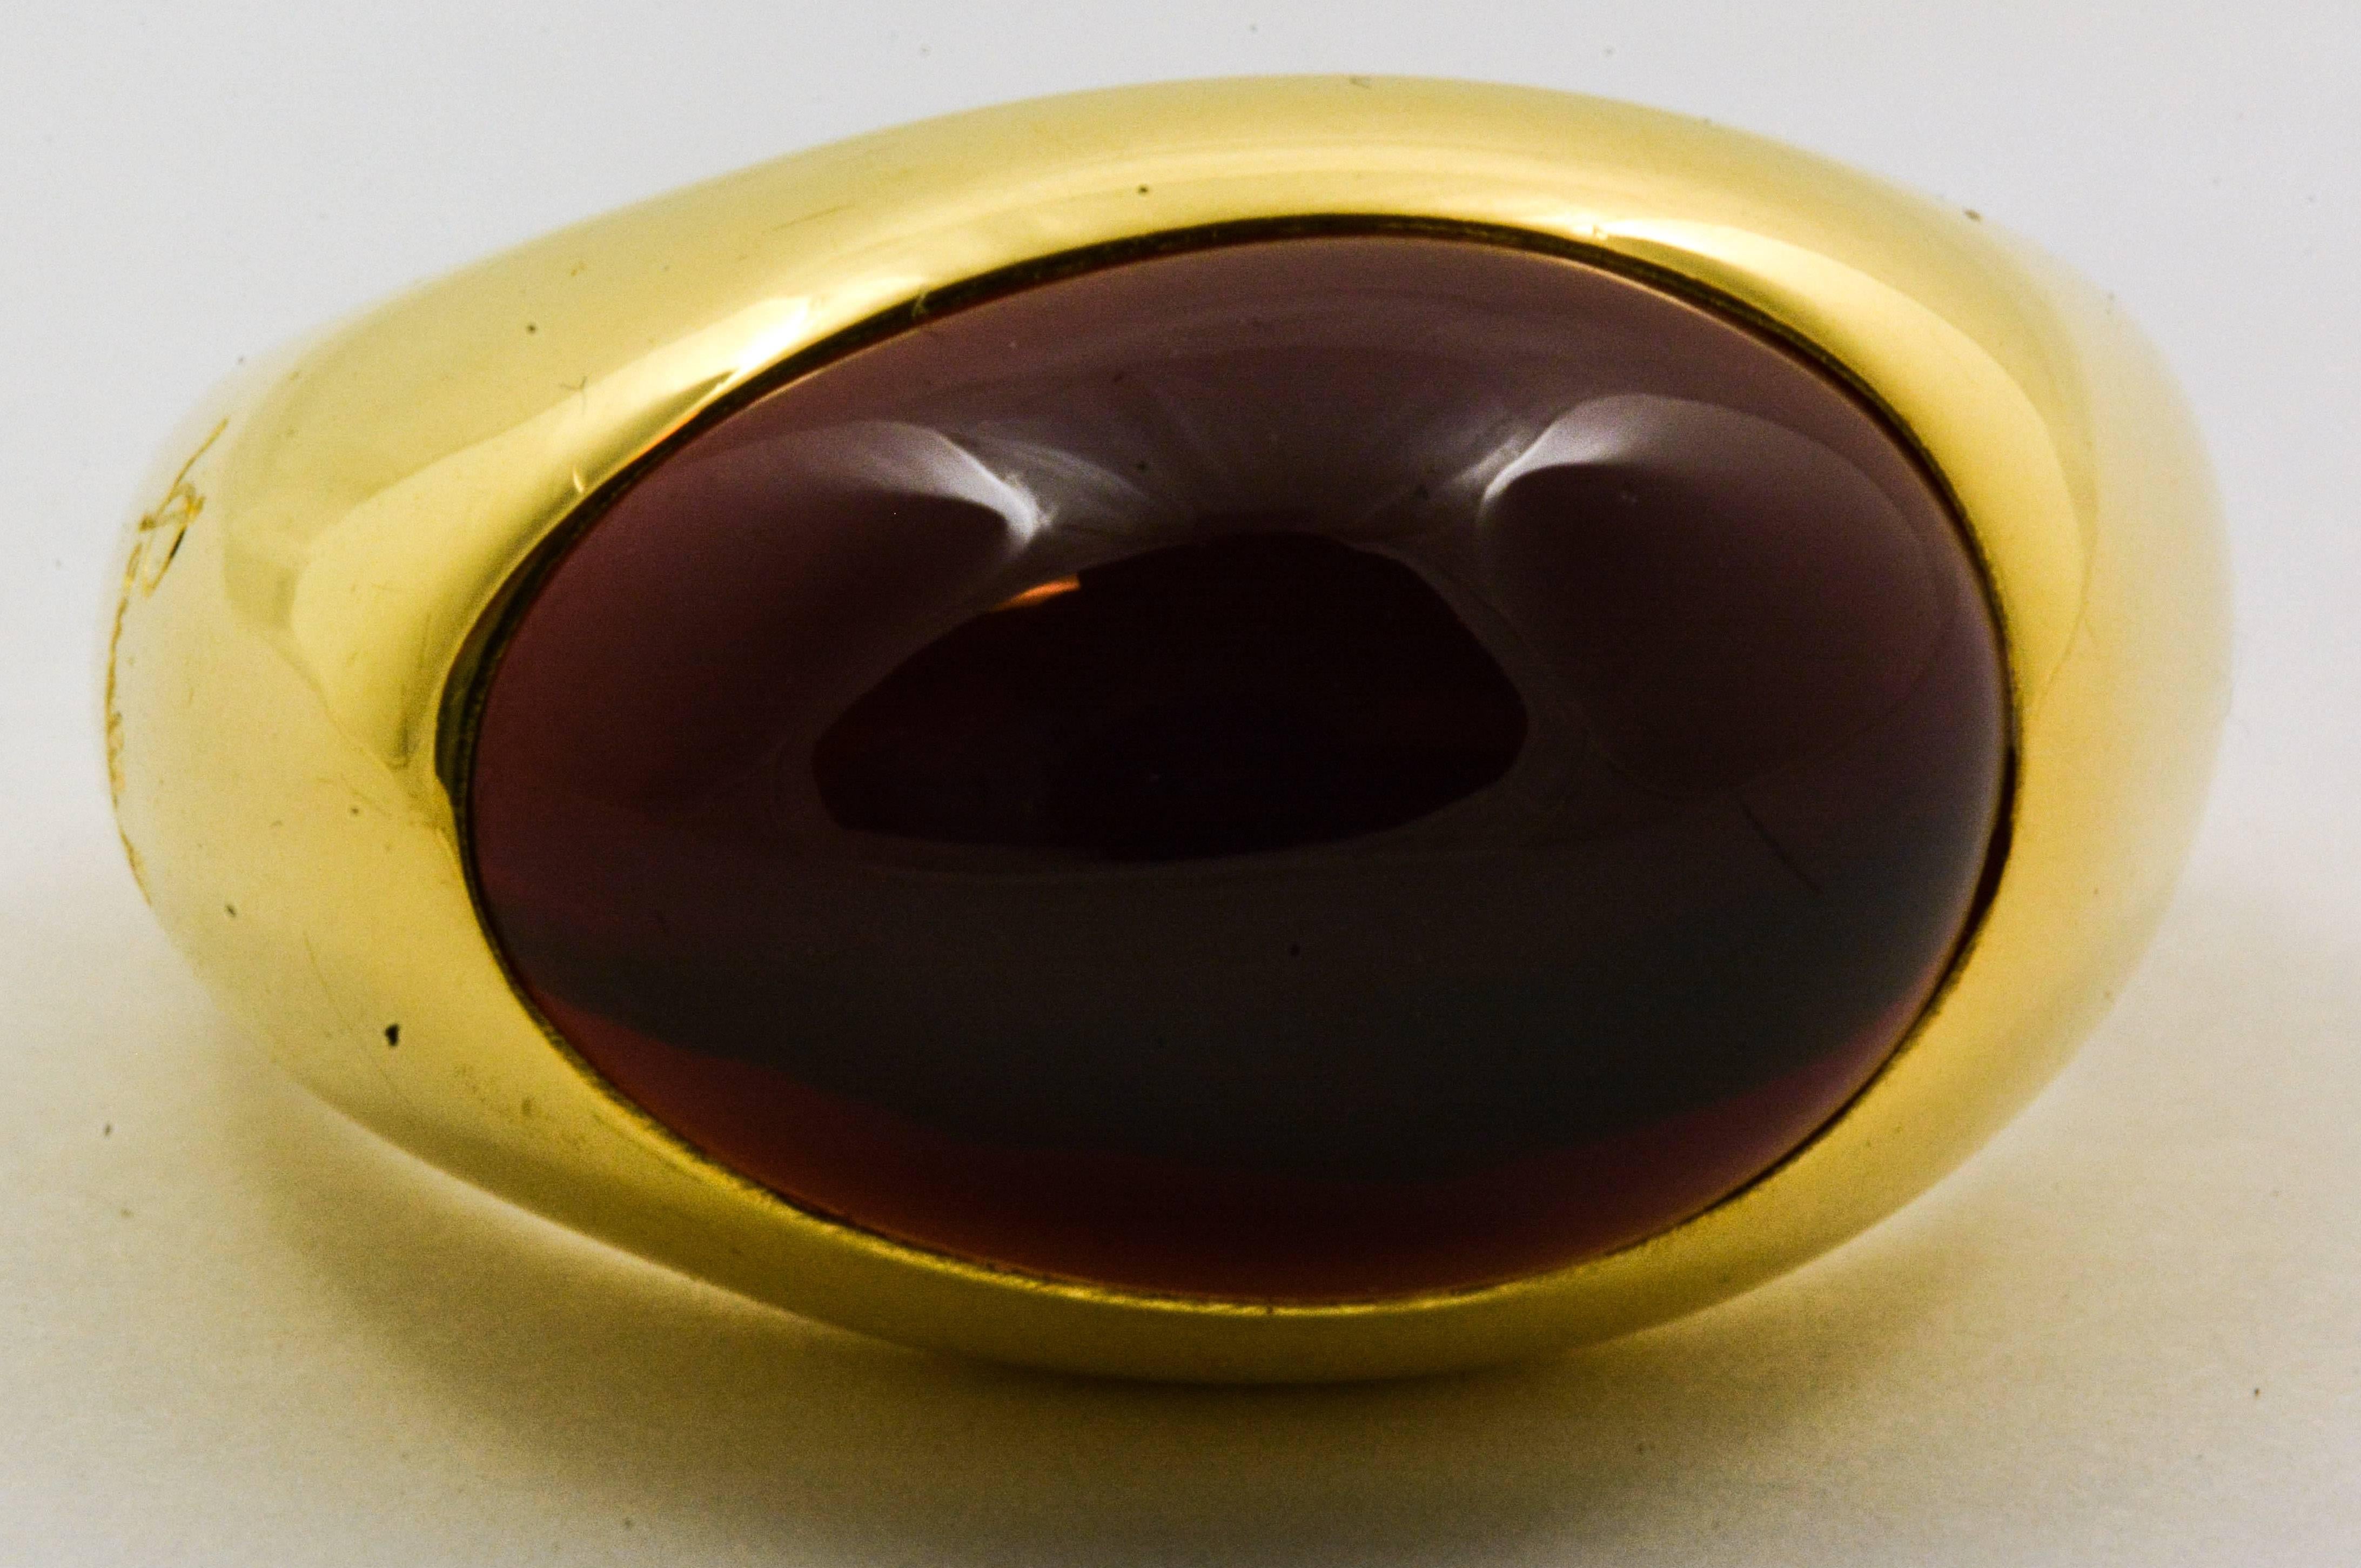 A gorgeous oval cabochon cut garnet weighing approximately 8.53 carats is the eye-catcher of this beautiful 18kt yellow gold estate Pomellato ring. With the designer’s name signed prominently on the side, this ring is unmistakably unique. It